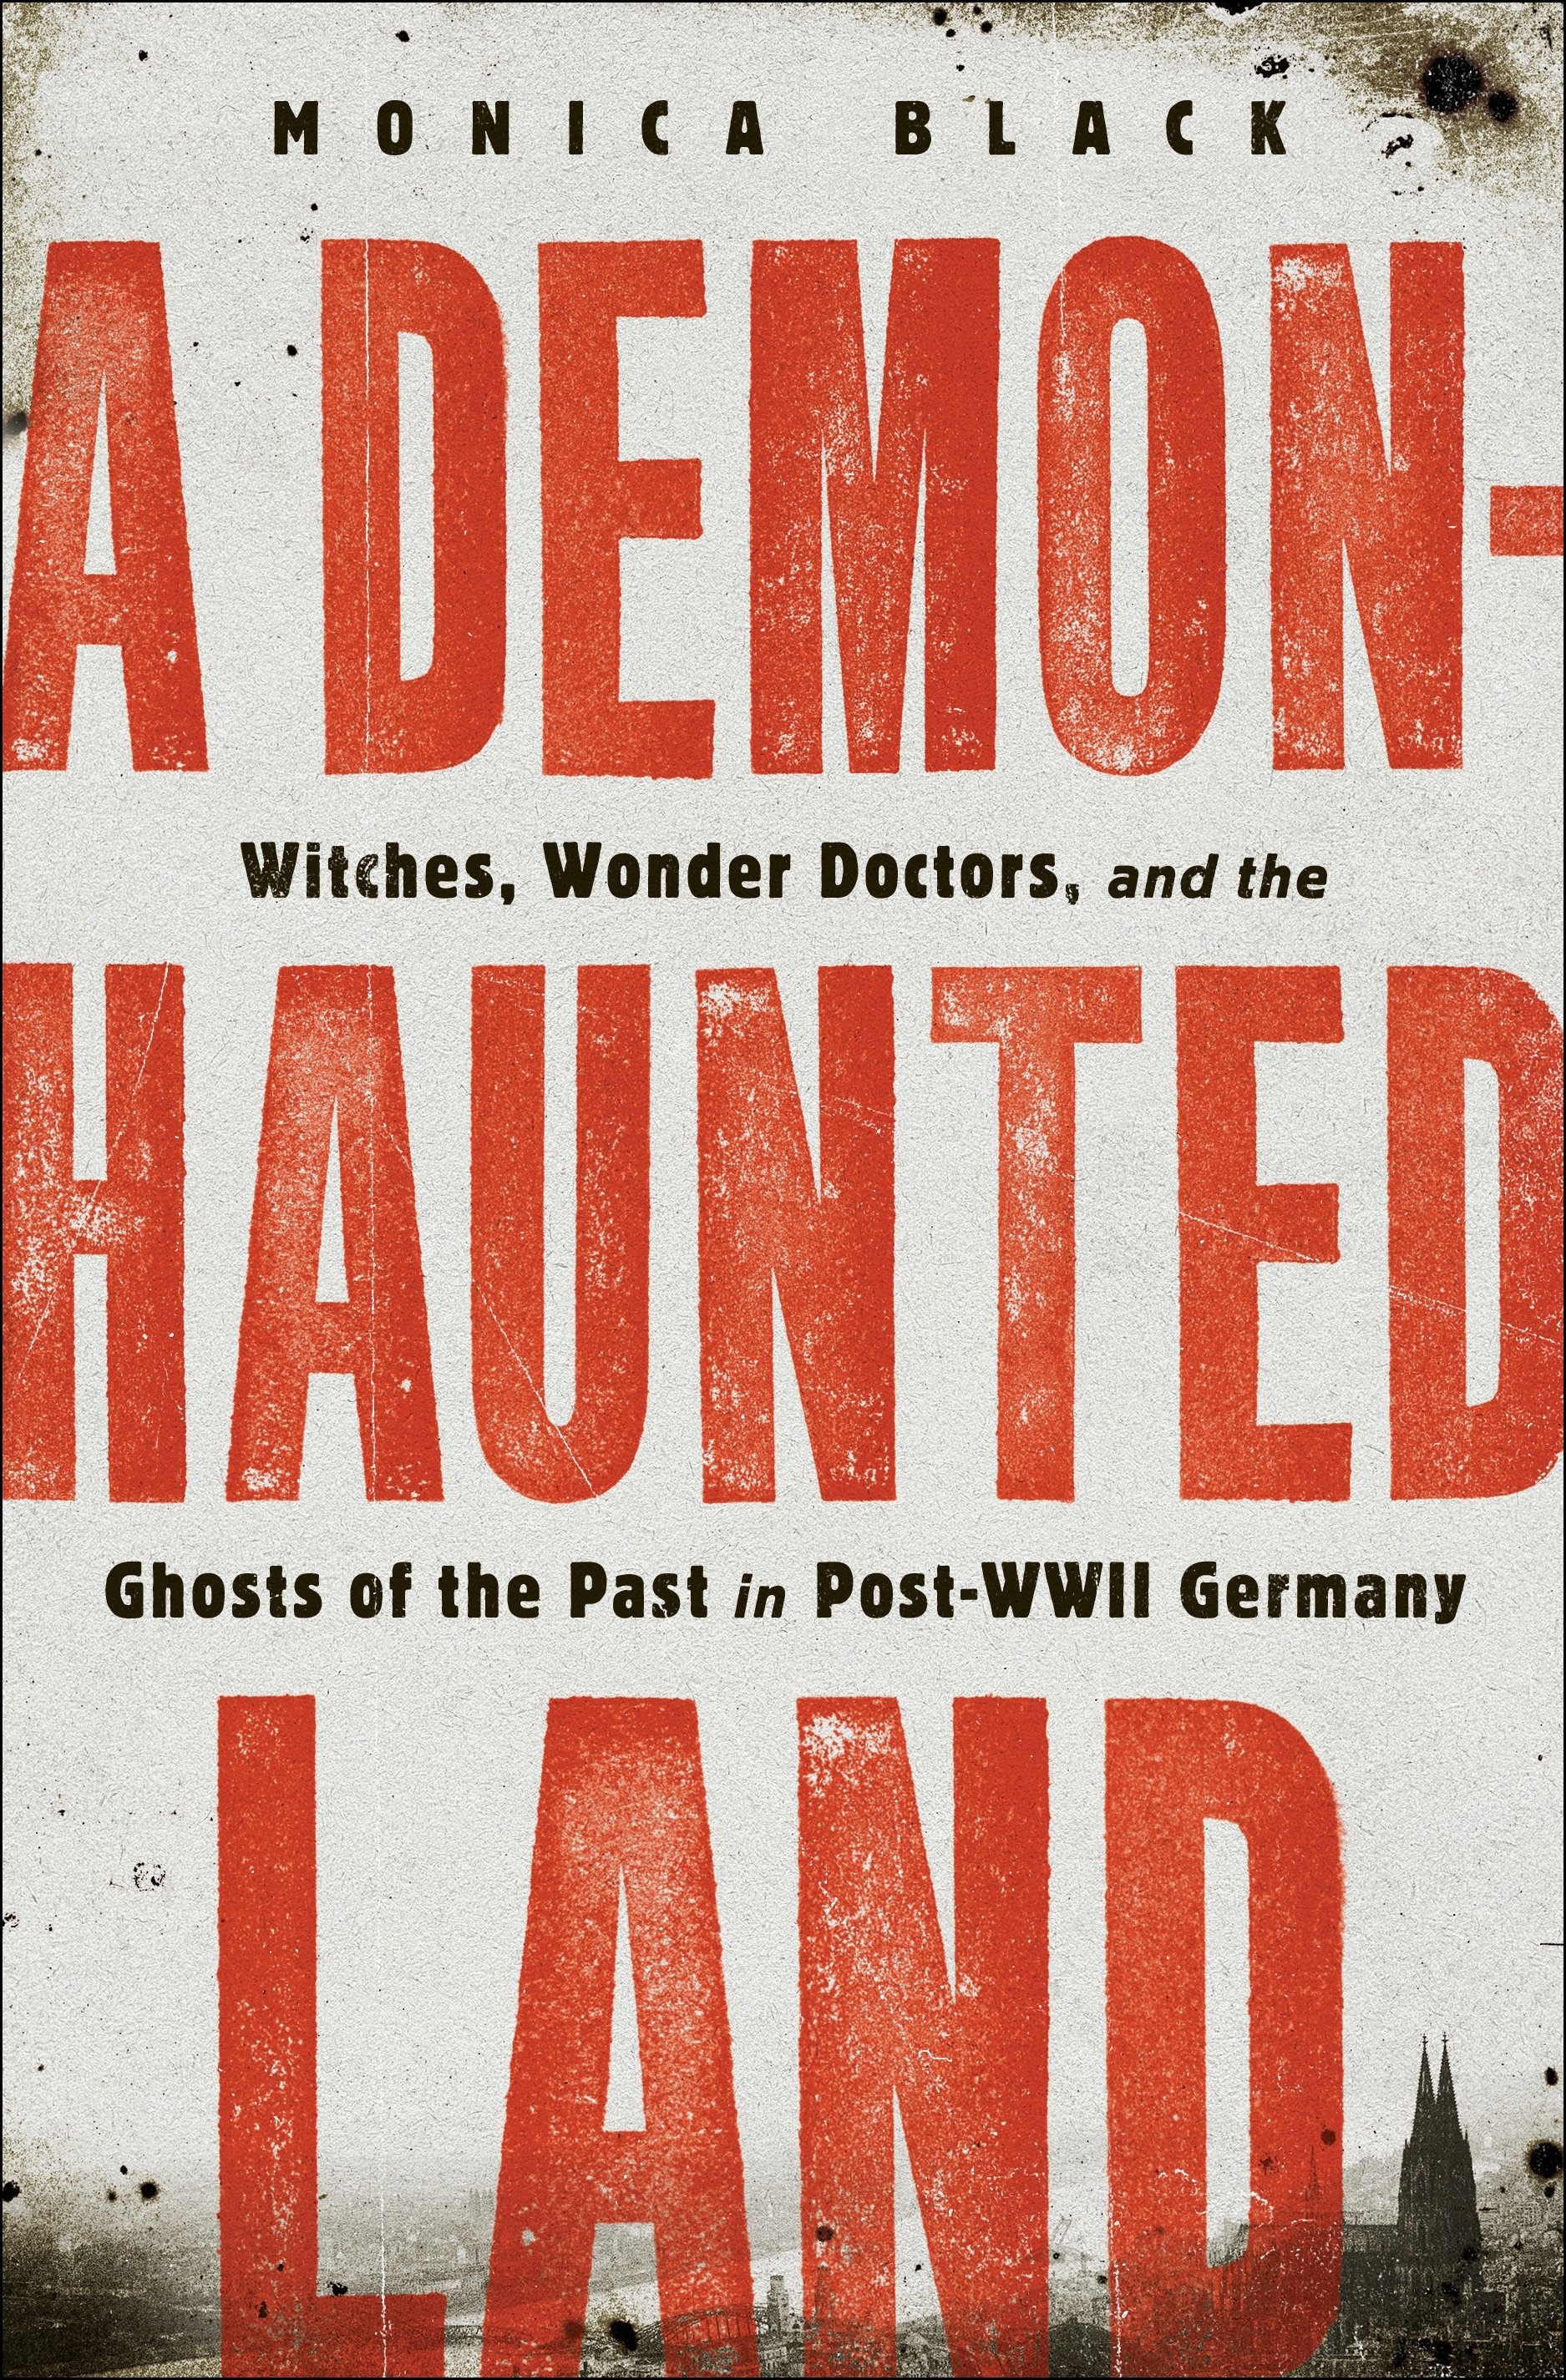 Book “A Demon-Haunted Land” by Monica Black — November 17, 2020